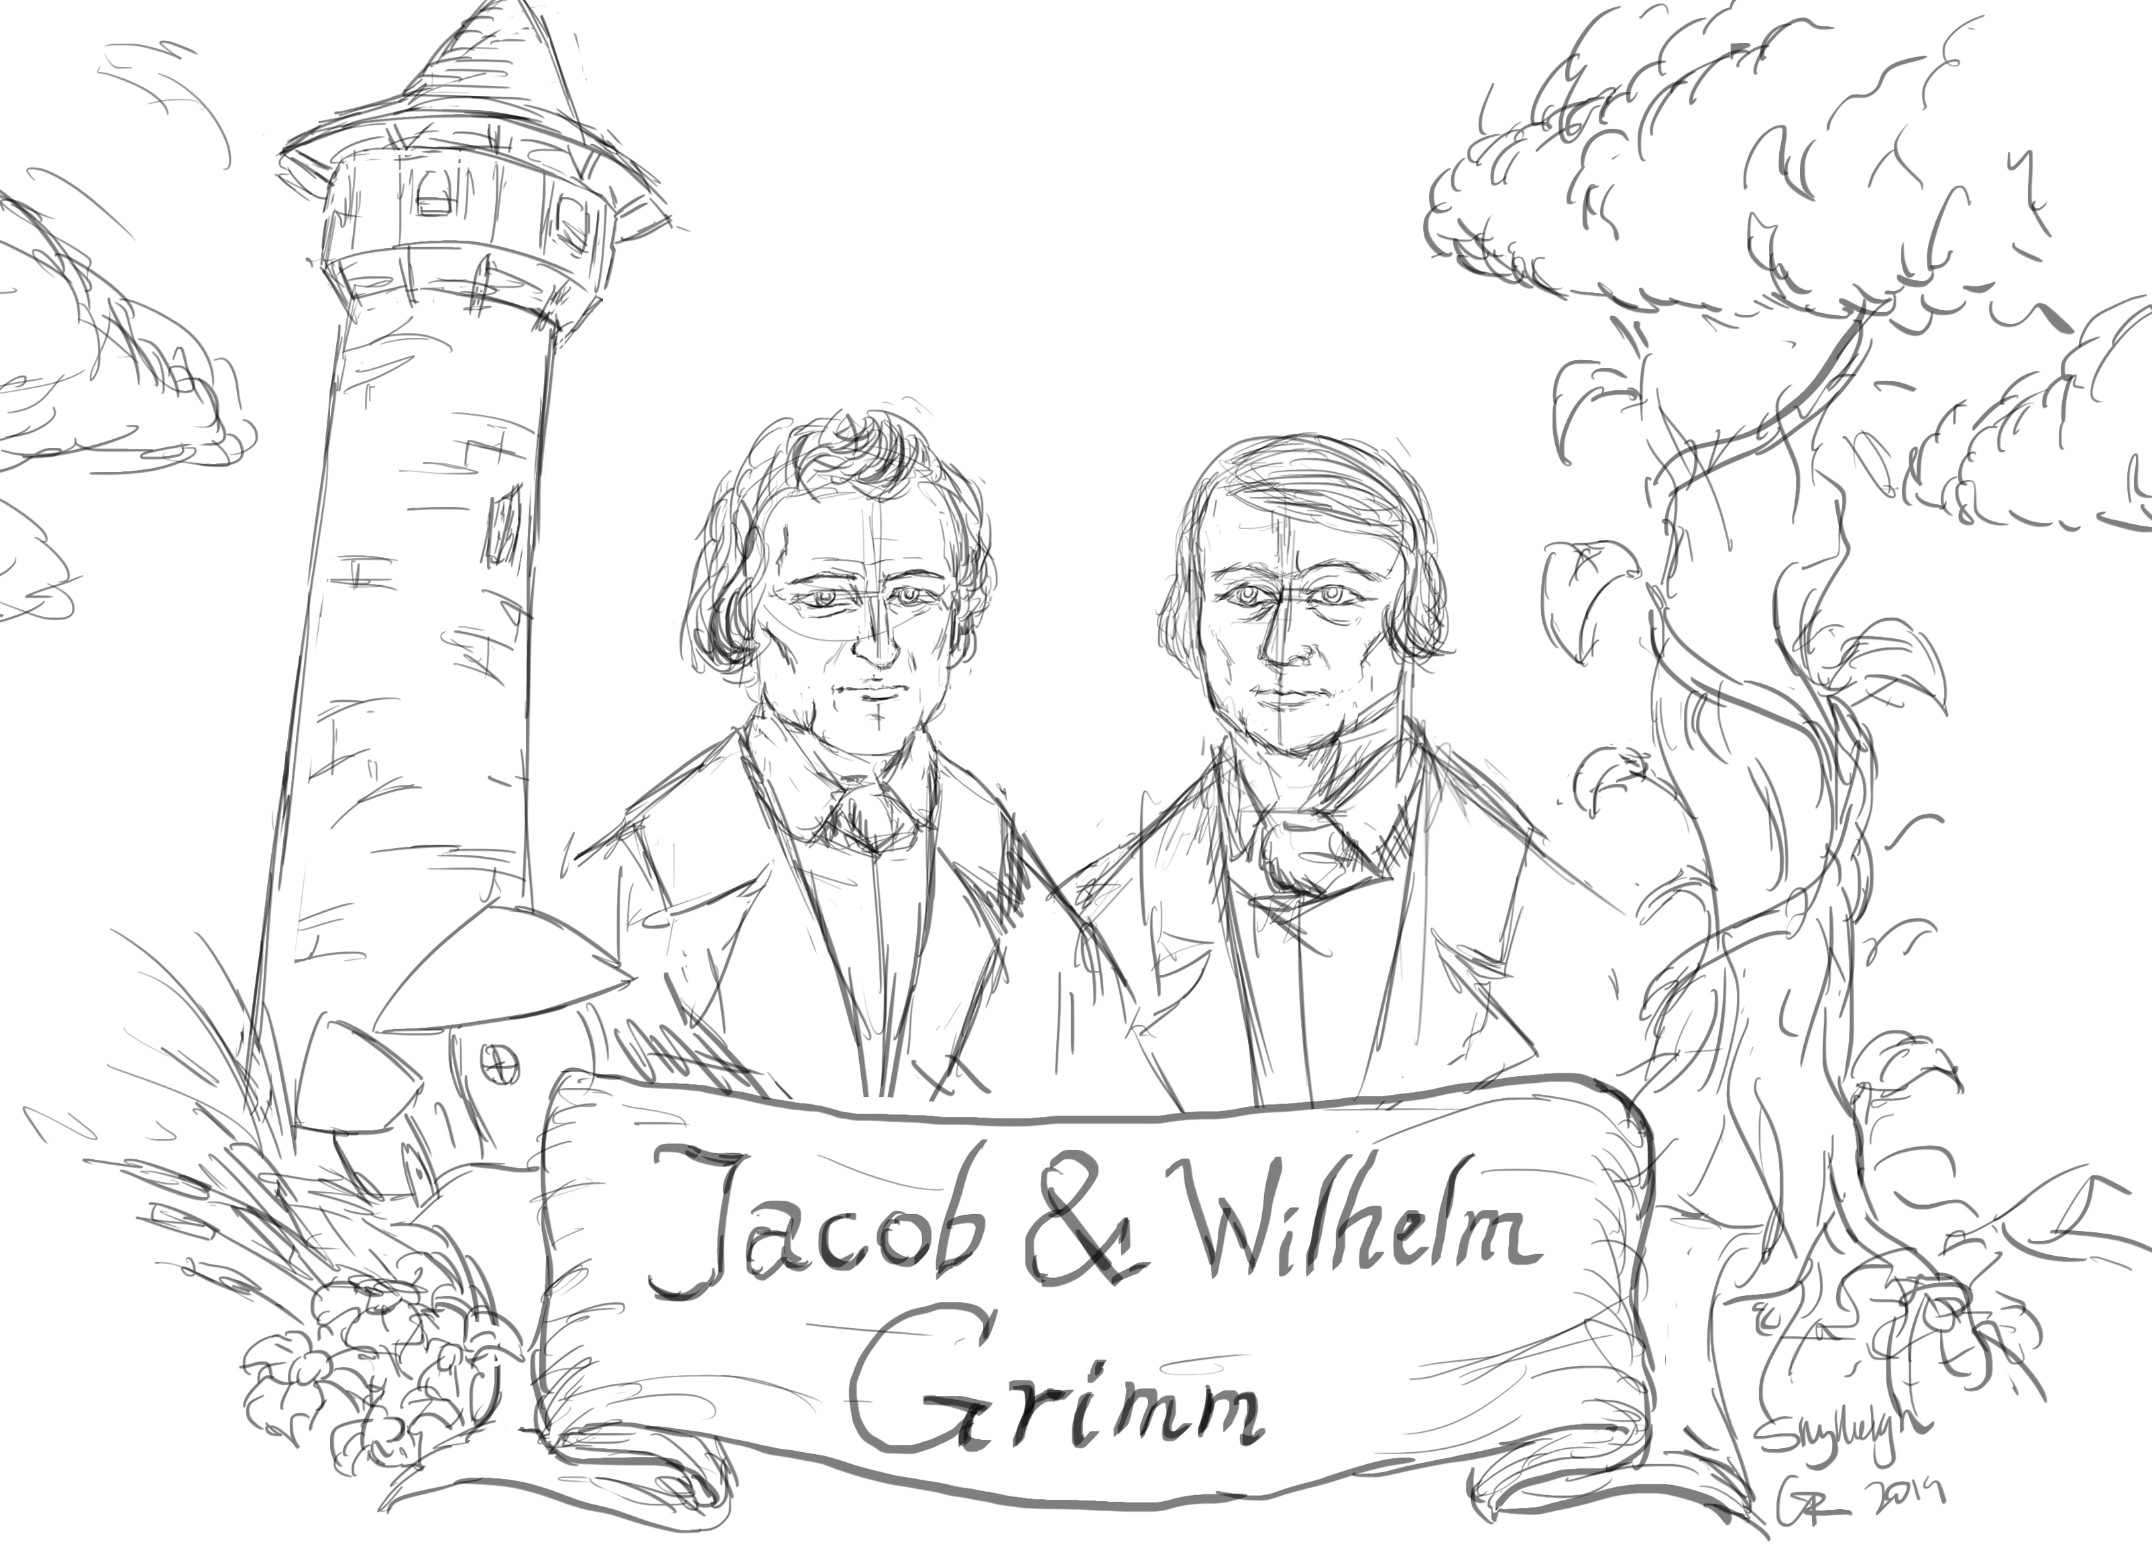 The Brothers Grimm by Shyllelagh